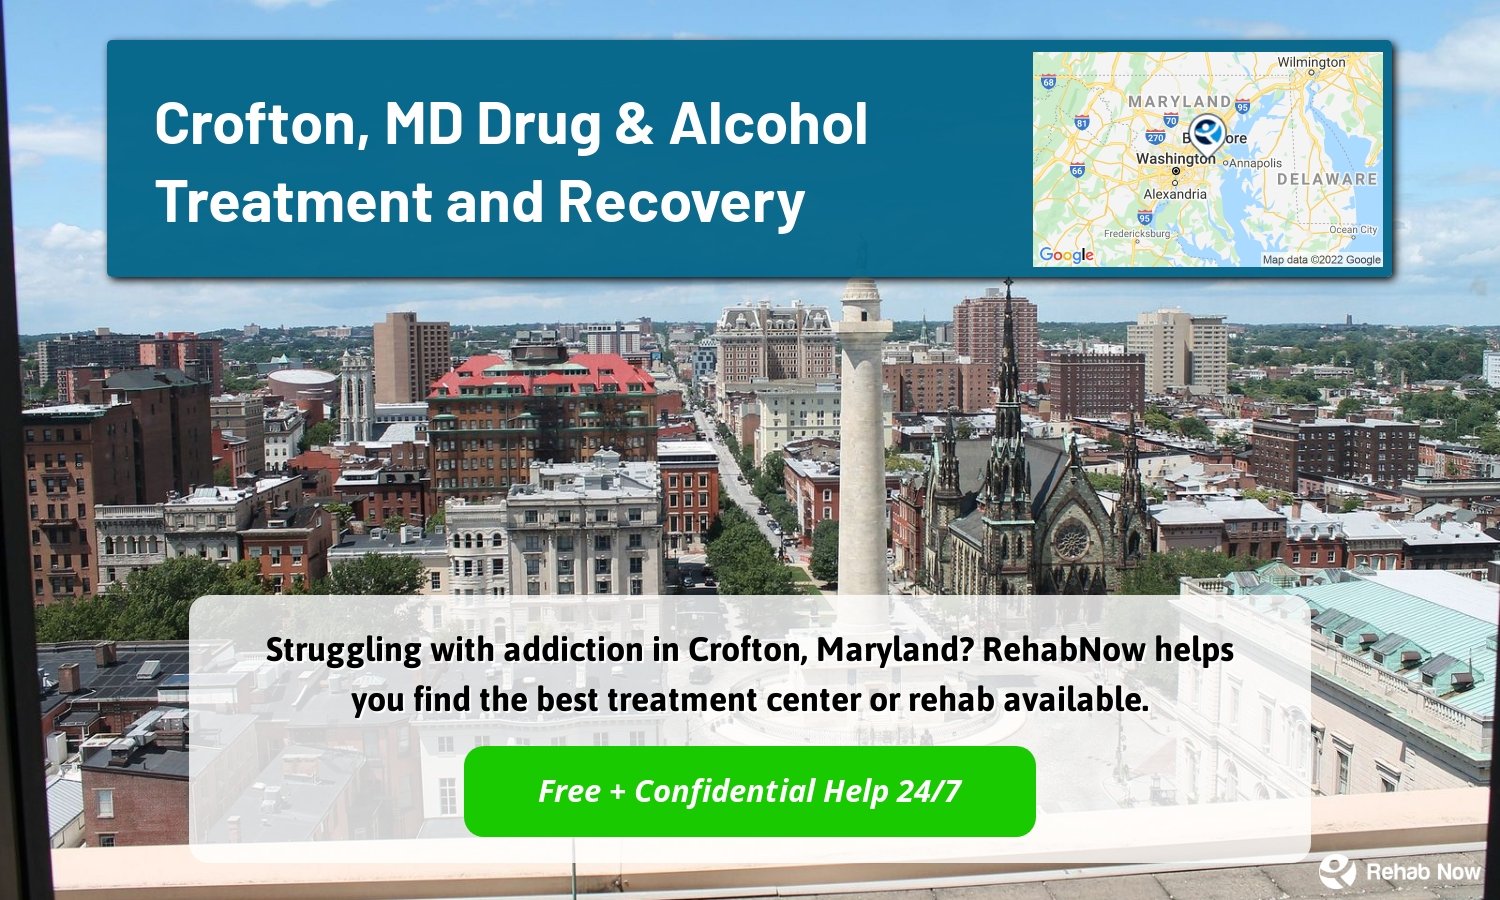 Struggling with addiction in Crofton, Maryland? RehabNow helps you find the best treatment center or rehab available.